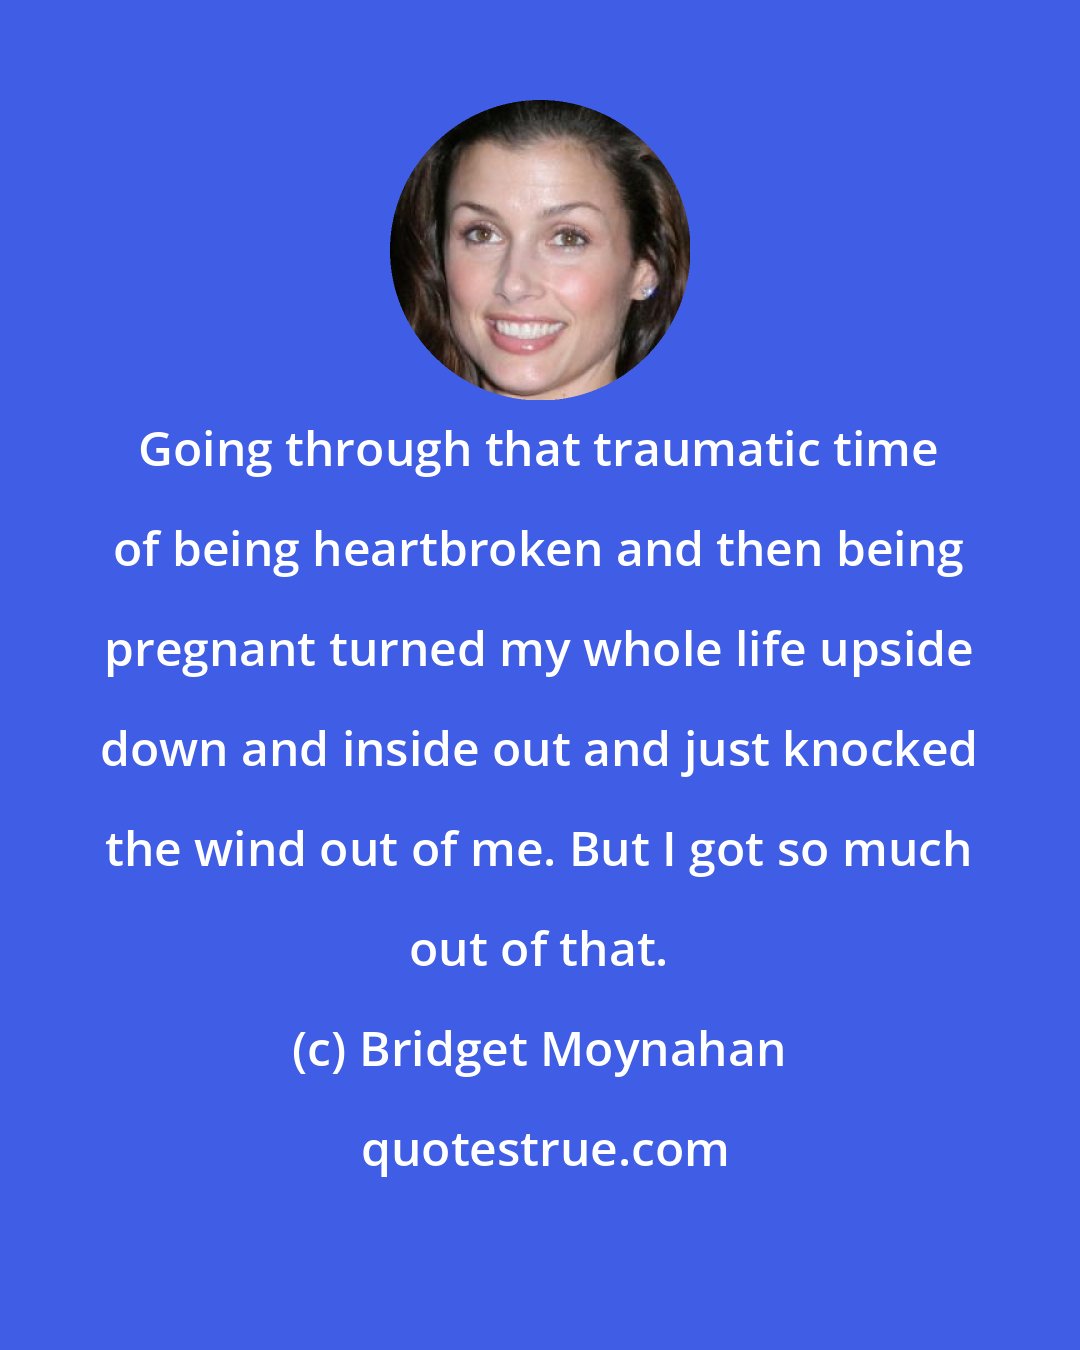 Bridget Moynahan: Going through that traumatic time of being heartbroken and then being pregnant turned my whole life upside down and inside out and just knocked the wind out of me. But I got so much out of that.